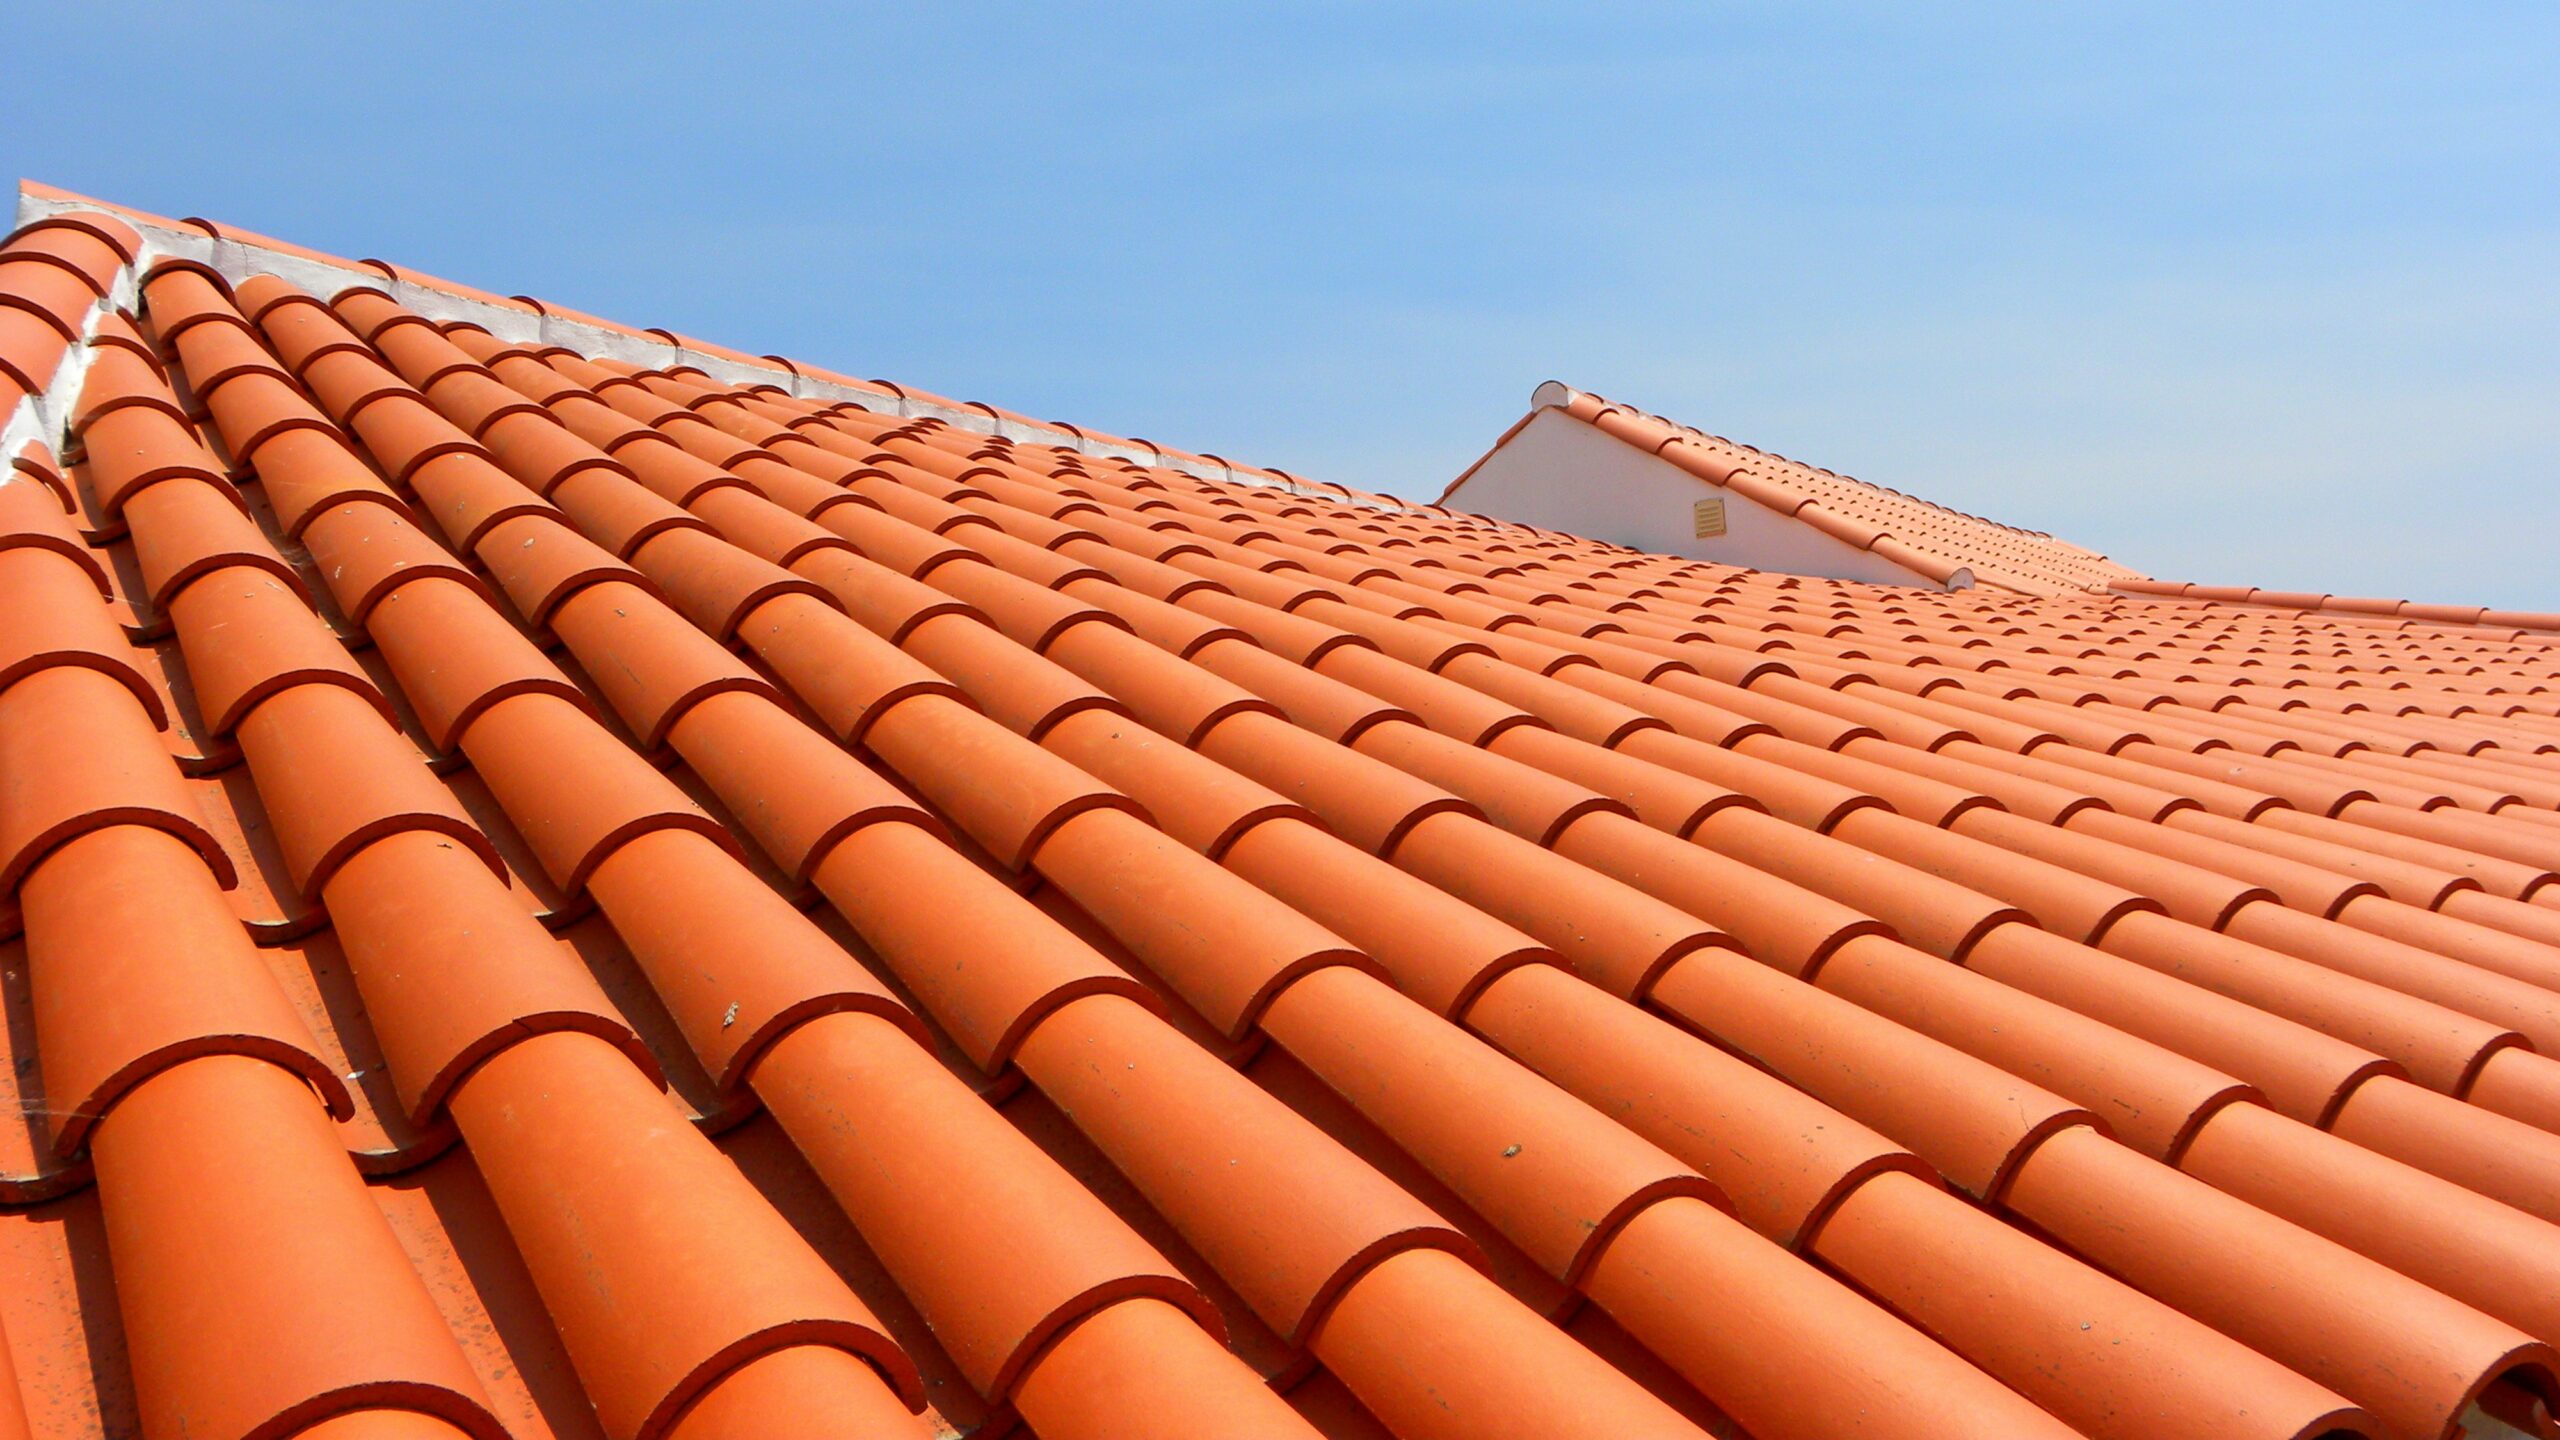 Clay roof tiles under blue sky